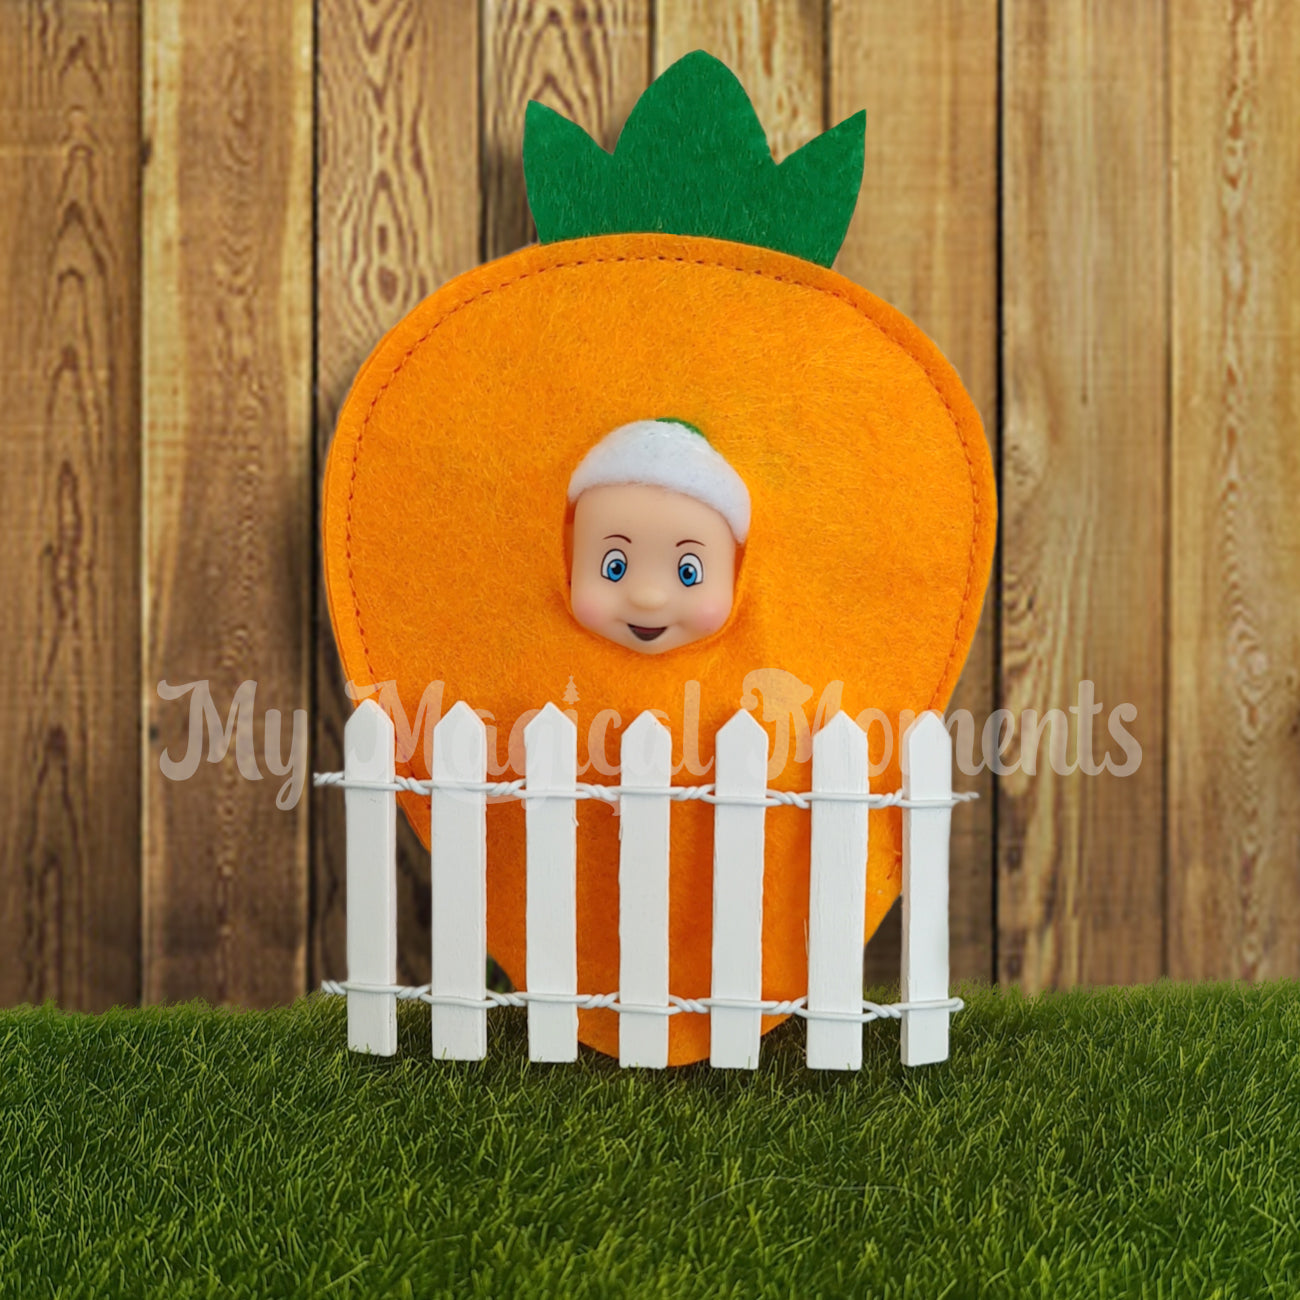 Baby Elf wearing a carrot costume and a picket fence